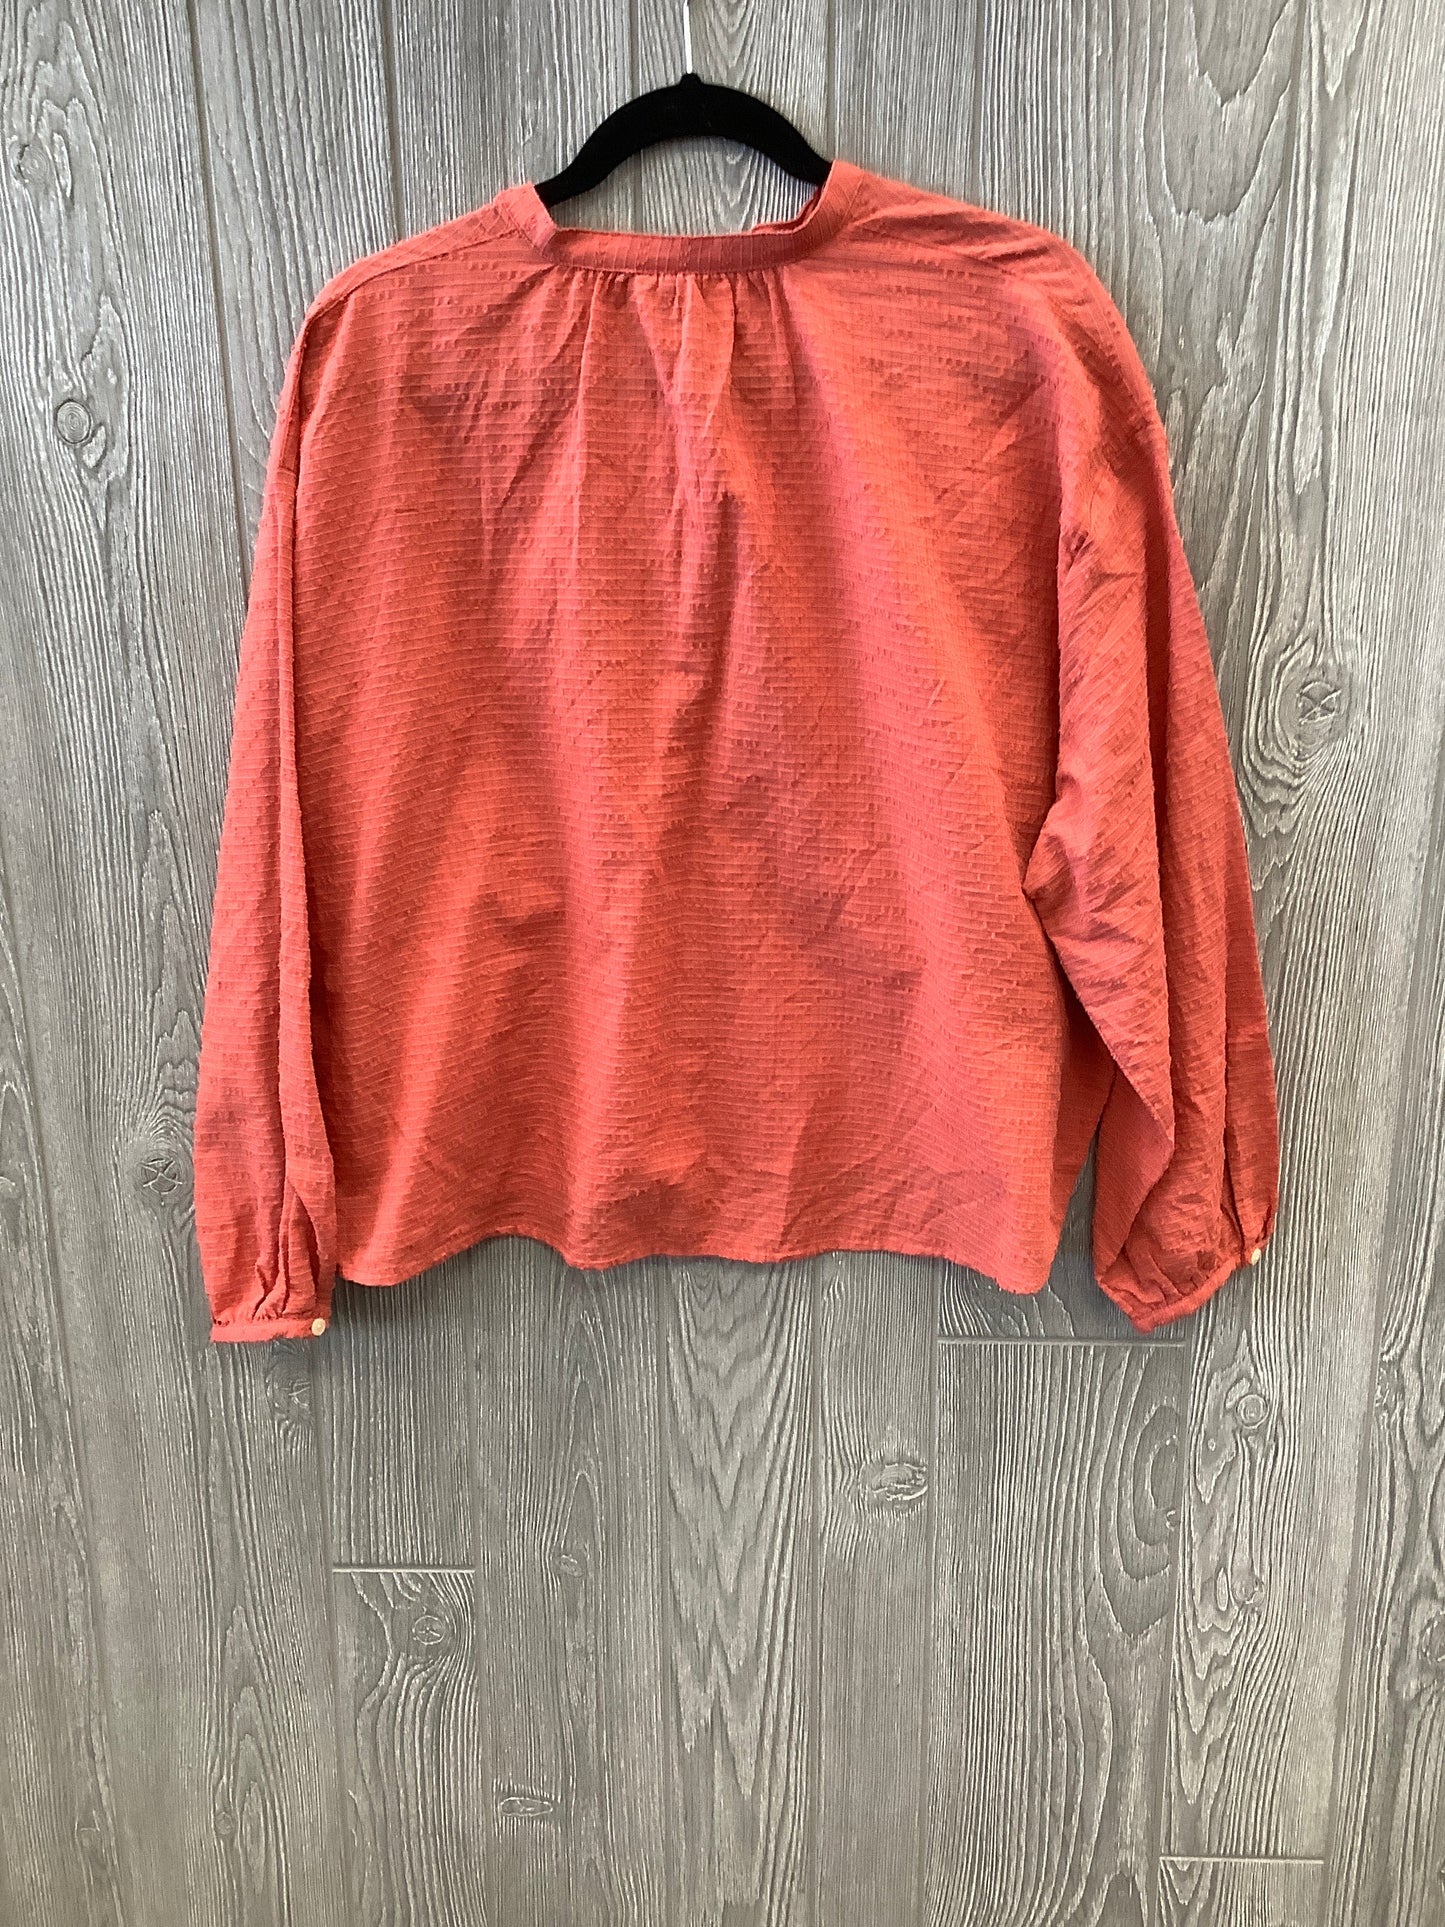 Top Long Sleeve By Universal Thread  Size: Xs